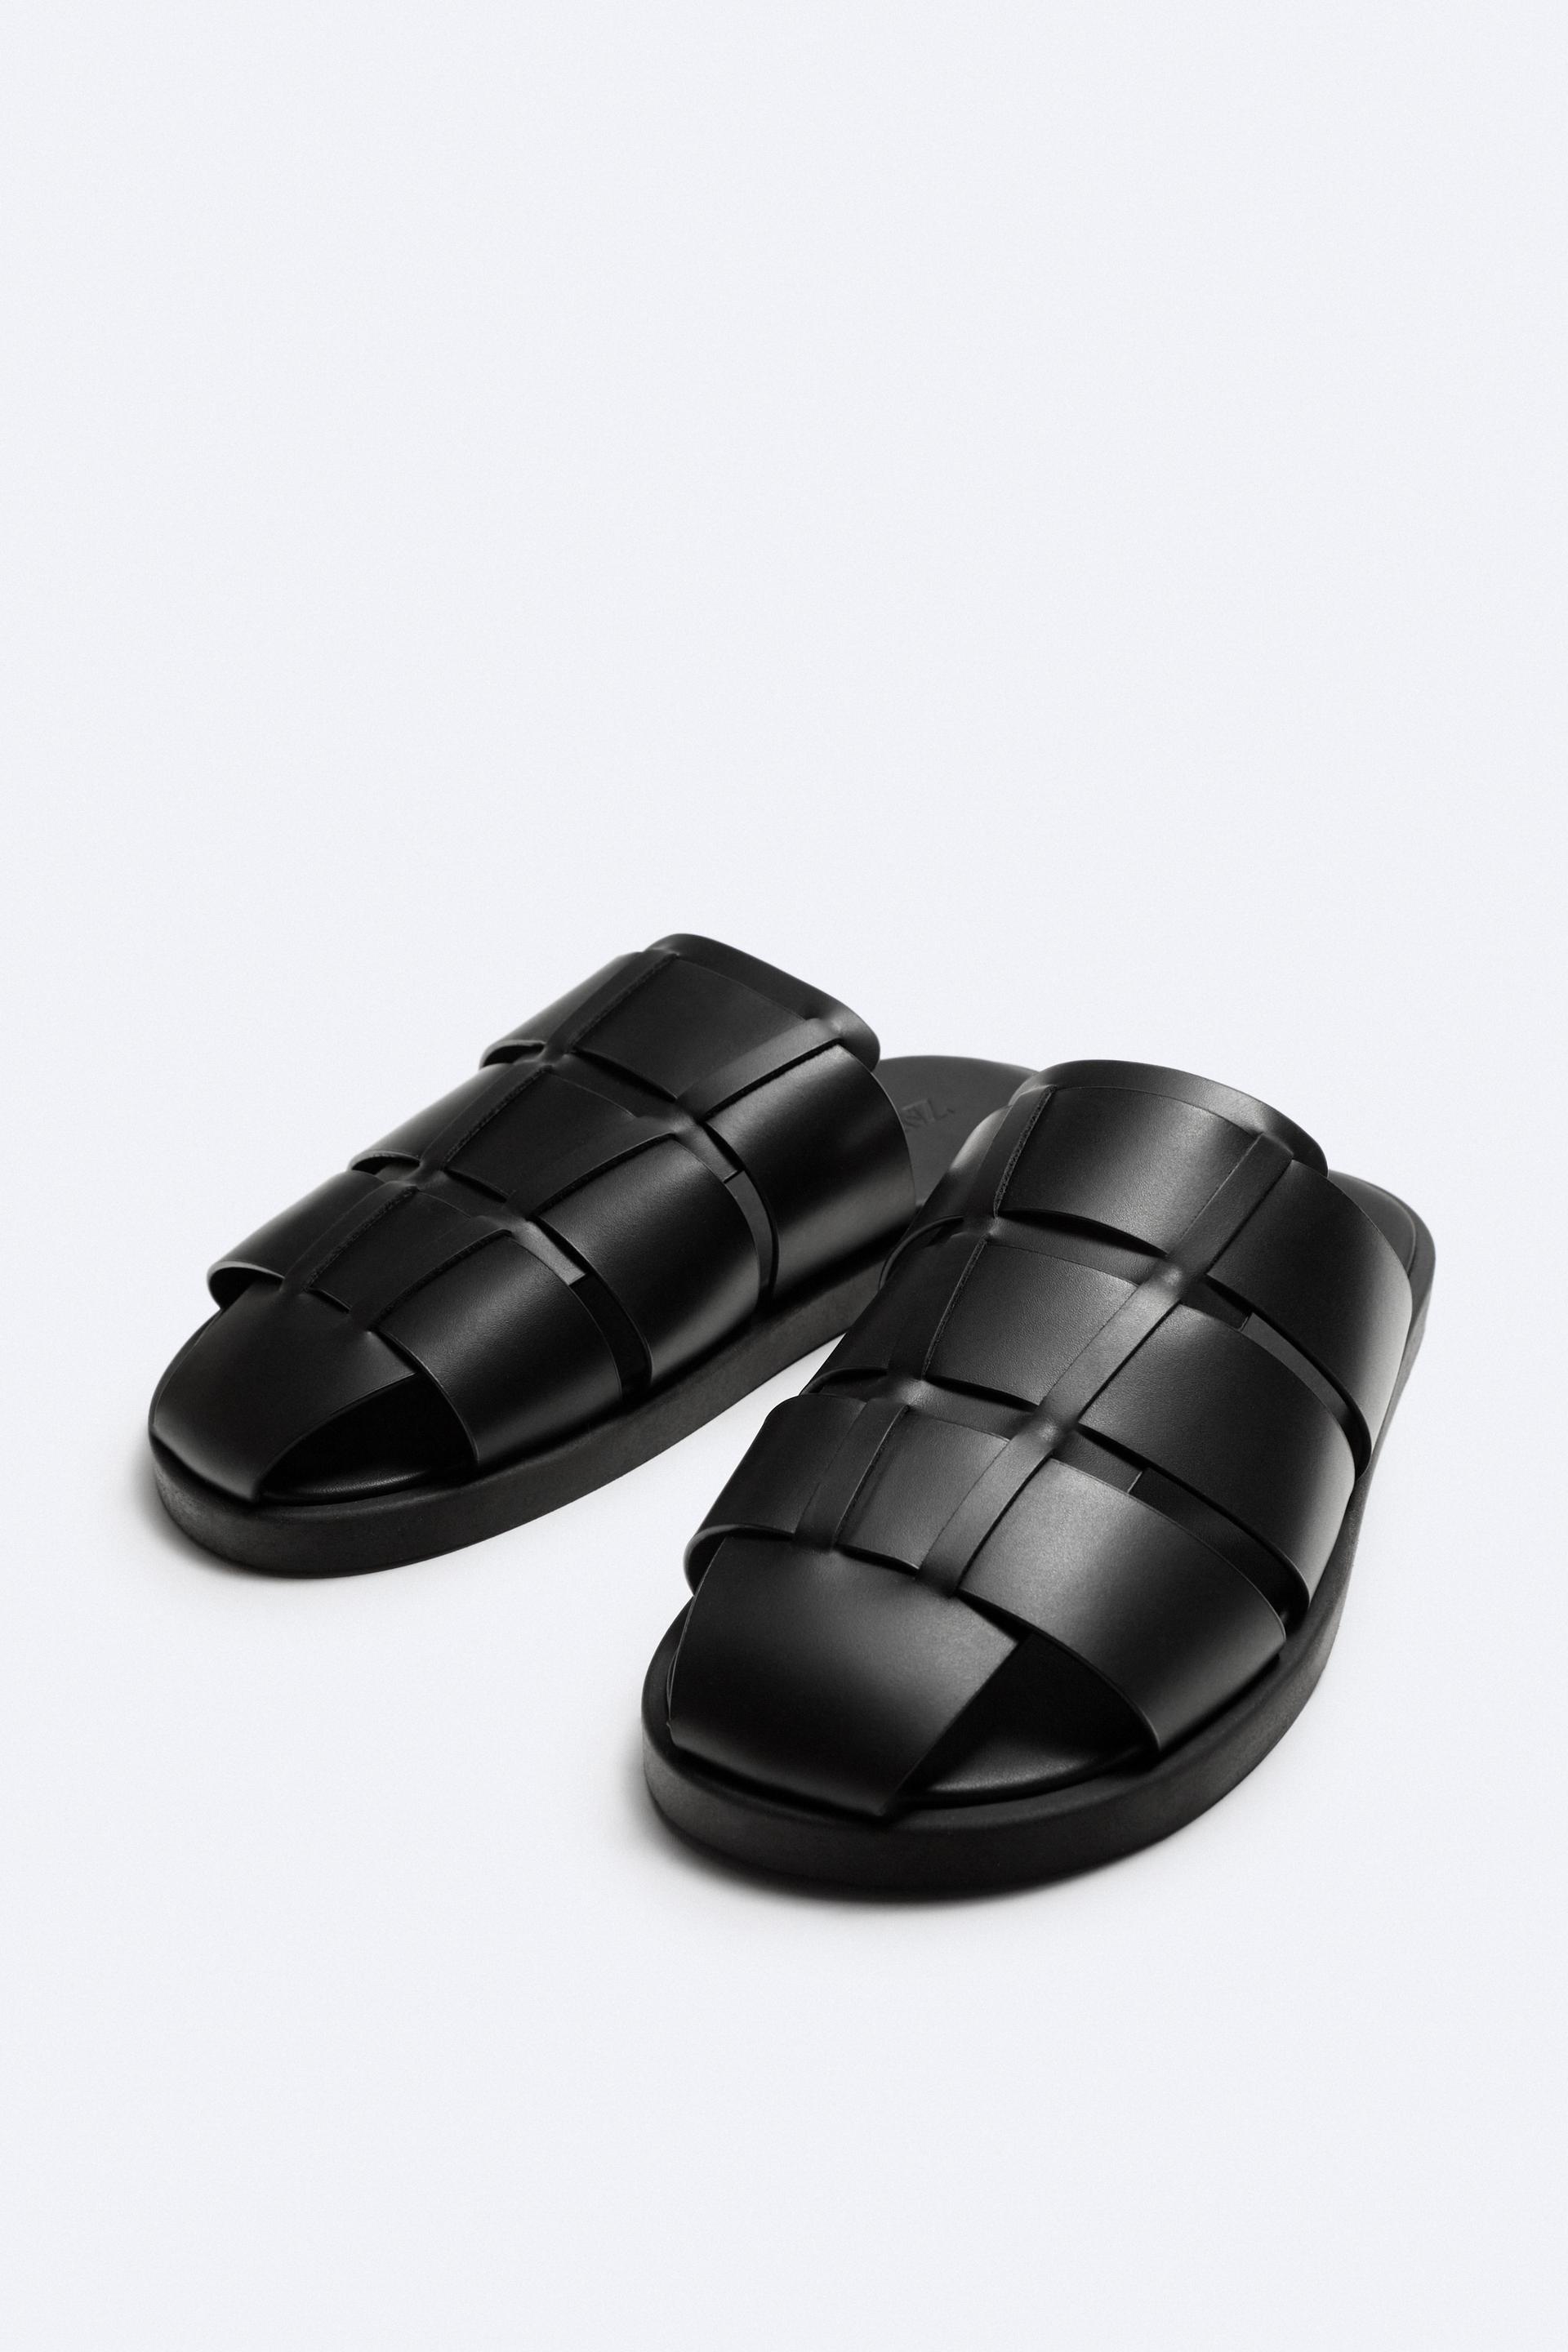 Zara - Fisherman Sandals with Lug Soles. Back Strap with Buckle Closure. Sole Height: 1.8 Inches (4.5 cm) - Black - Women